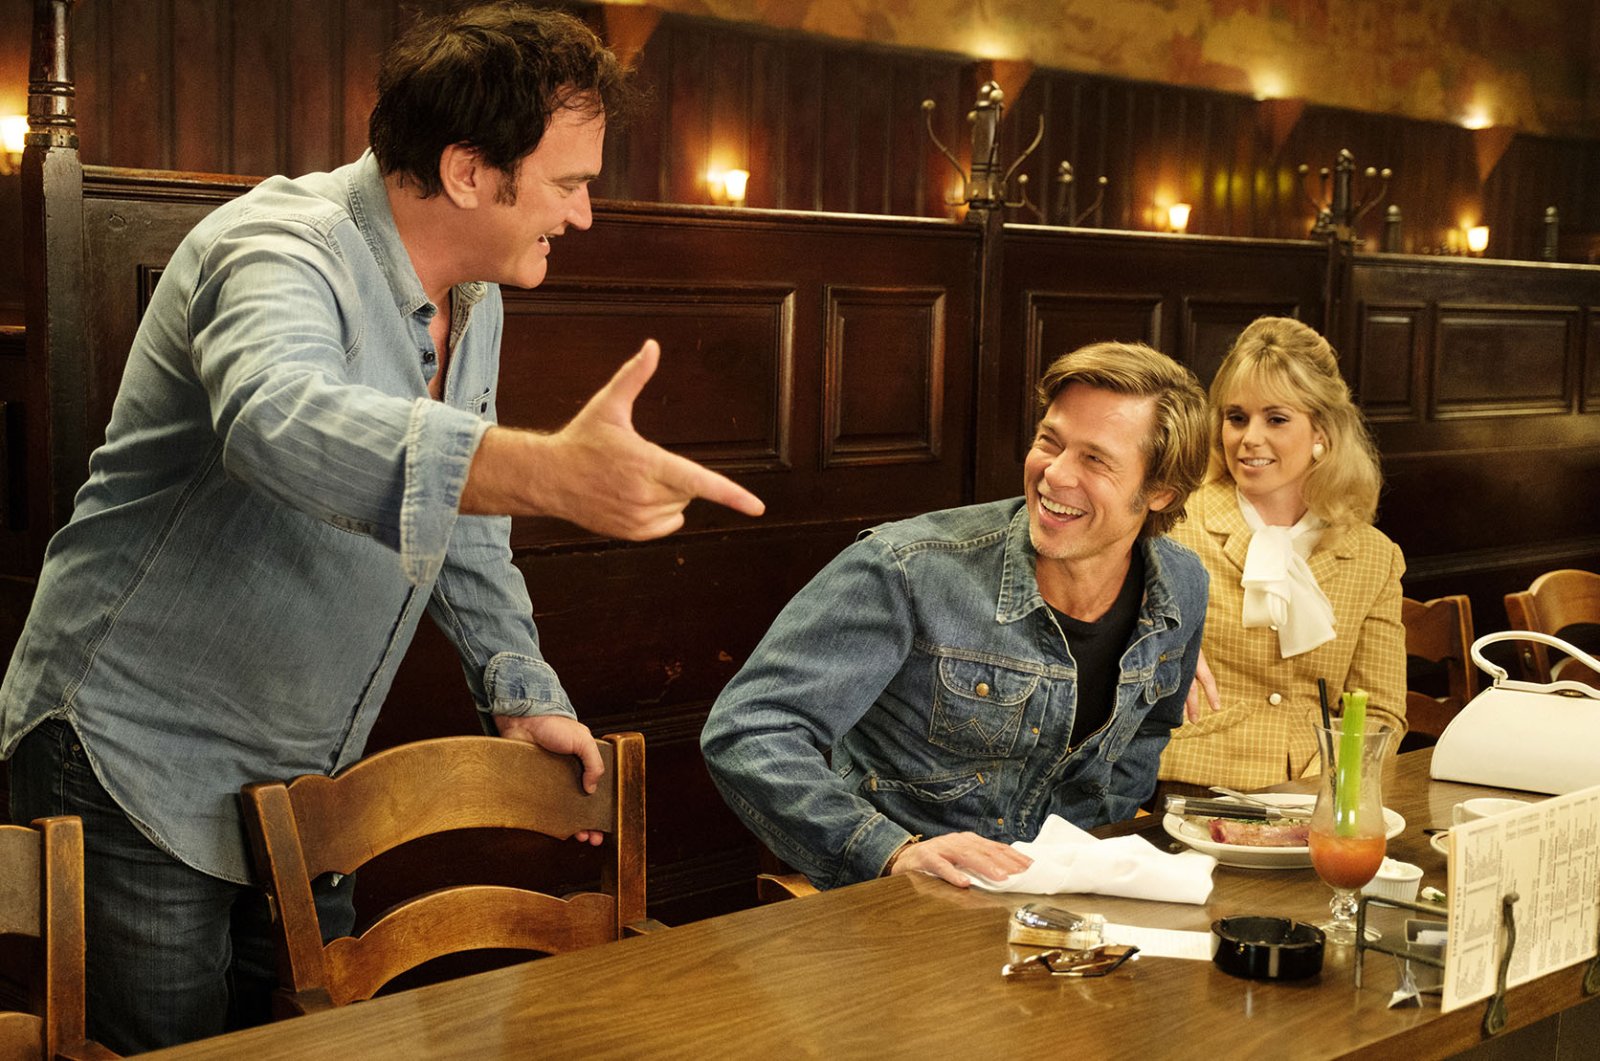 Brad Pitt, Quentin Tarantino, and Elise Nygaard Olson in Once Upon a Time in... Hollywood